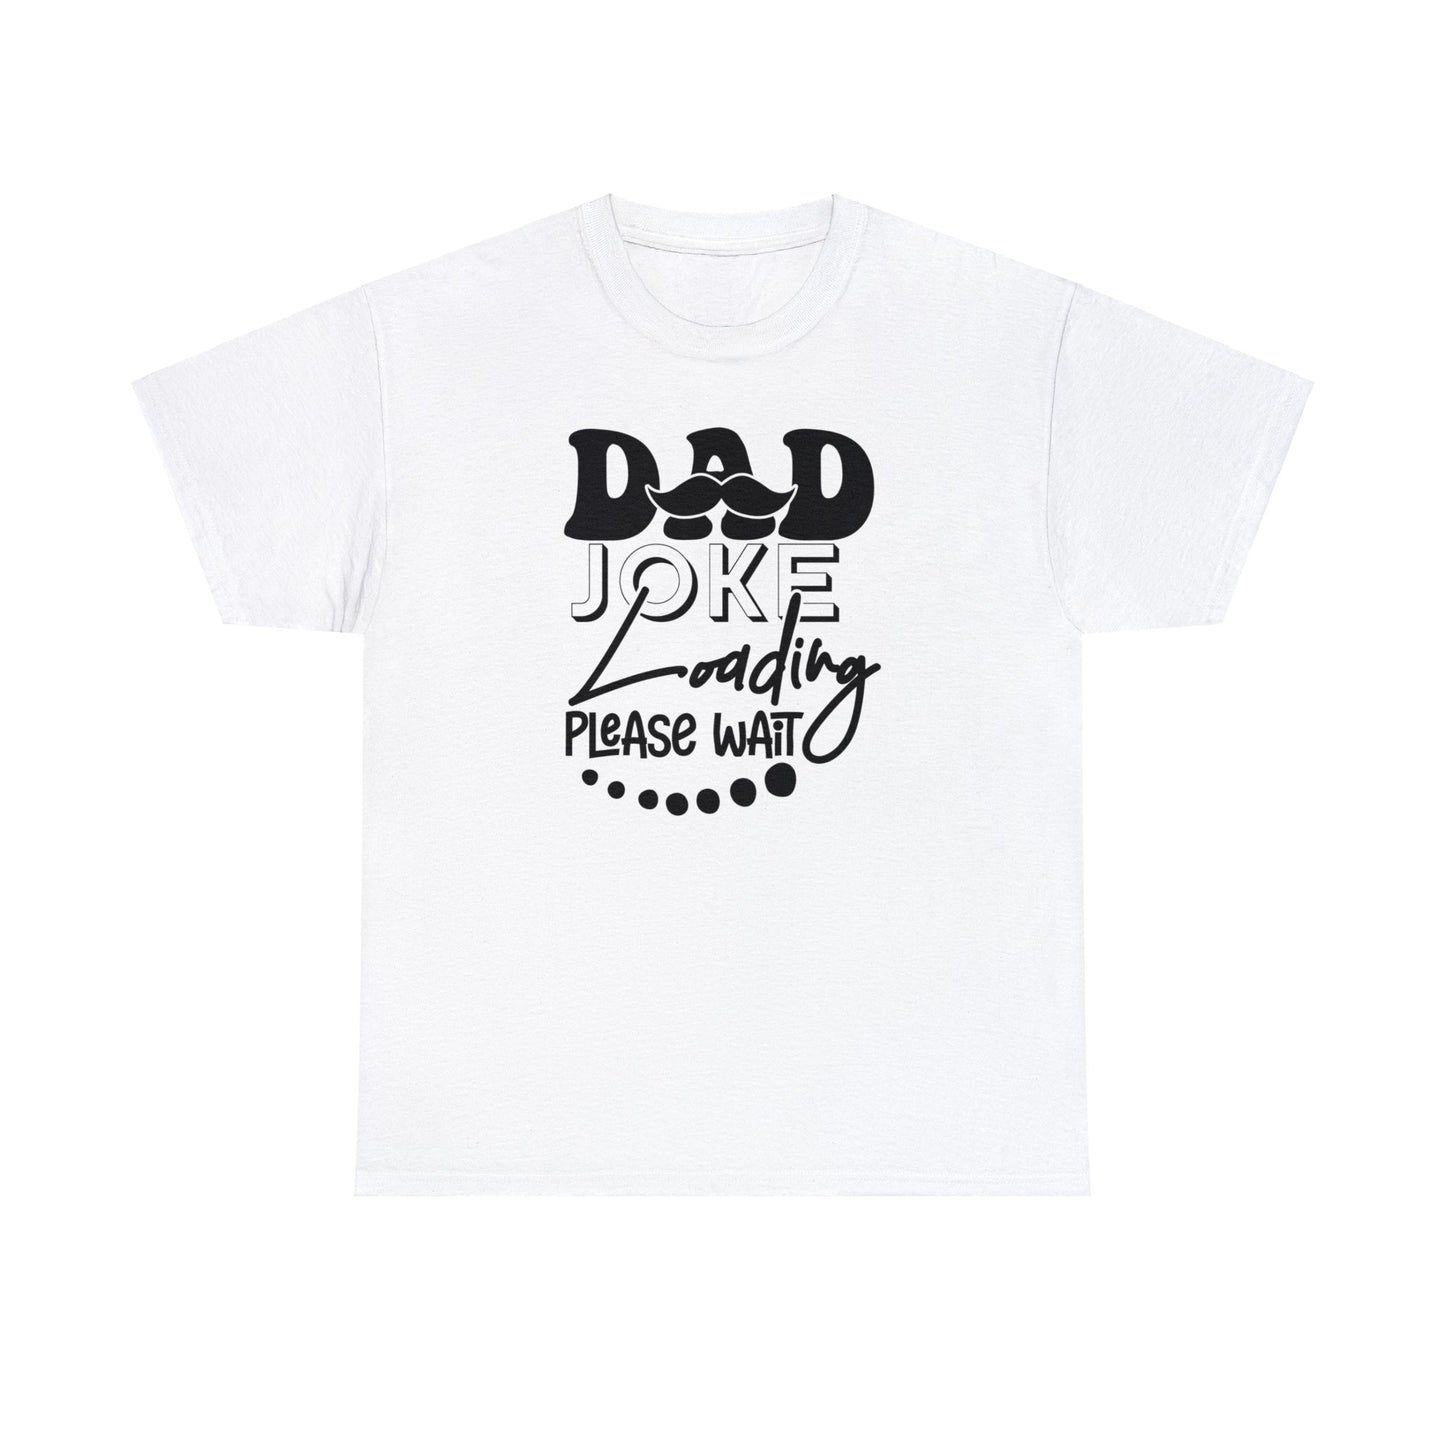 Funny Dad T-Shirt For Dad Joke T Shirt For Cool Father's Day TShirt